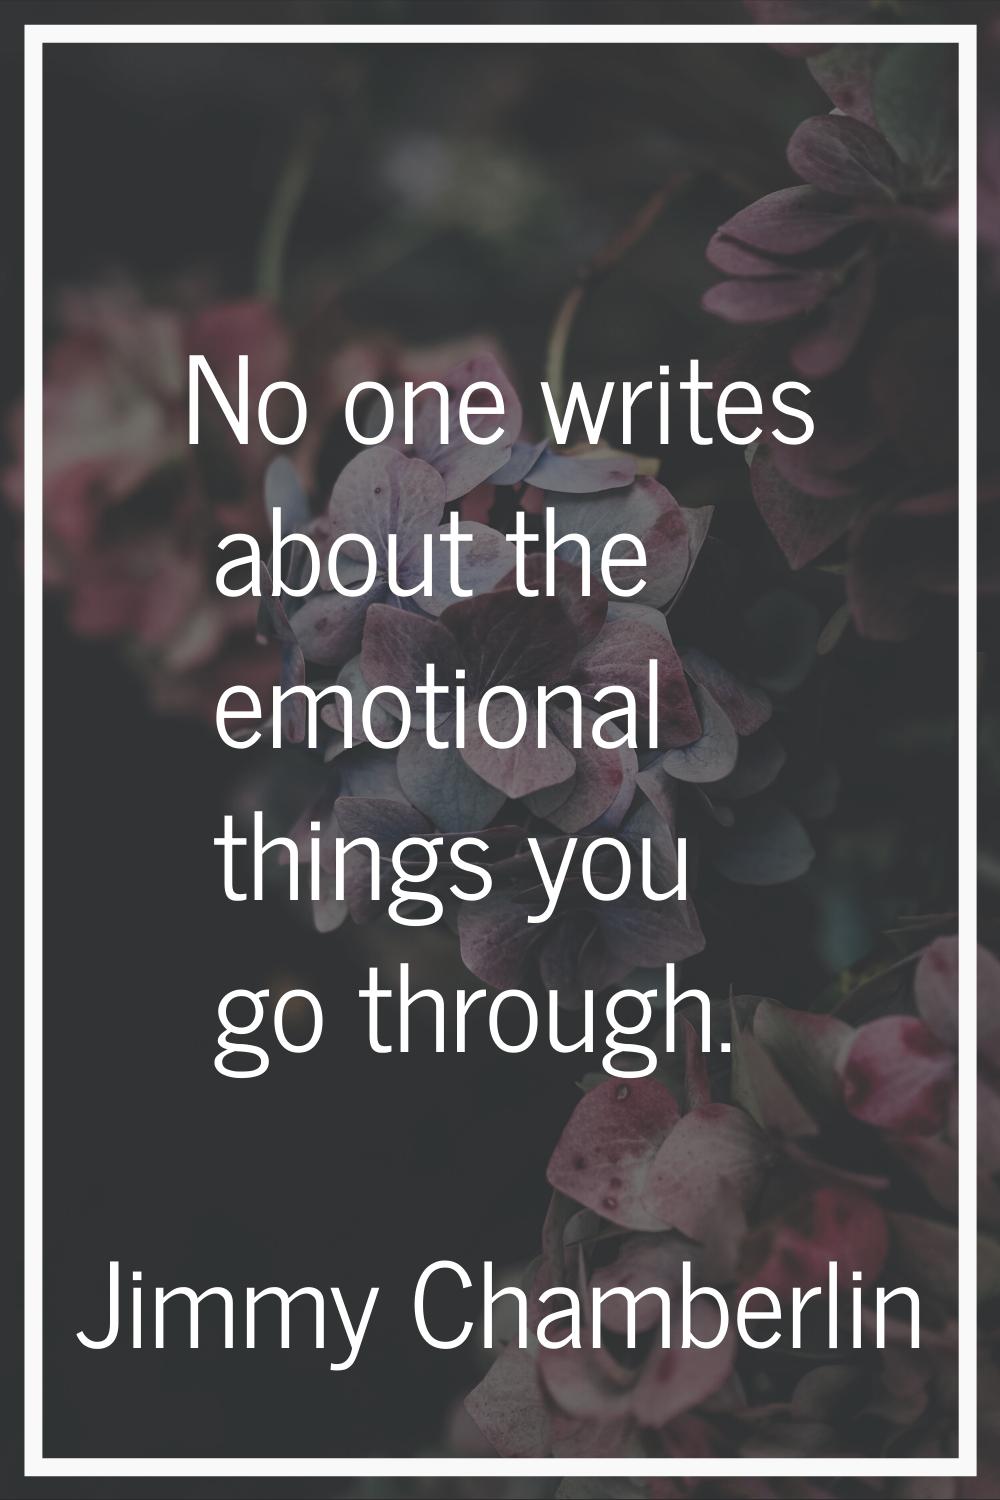 No one writes about the emotional things you go through.